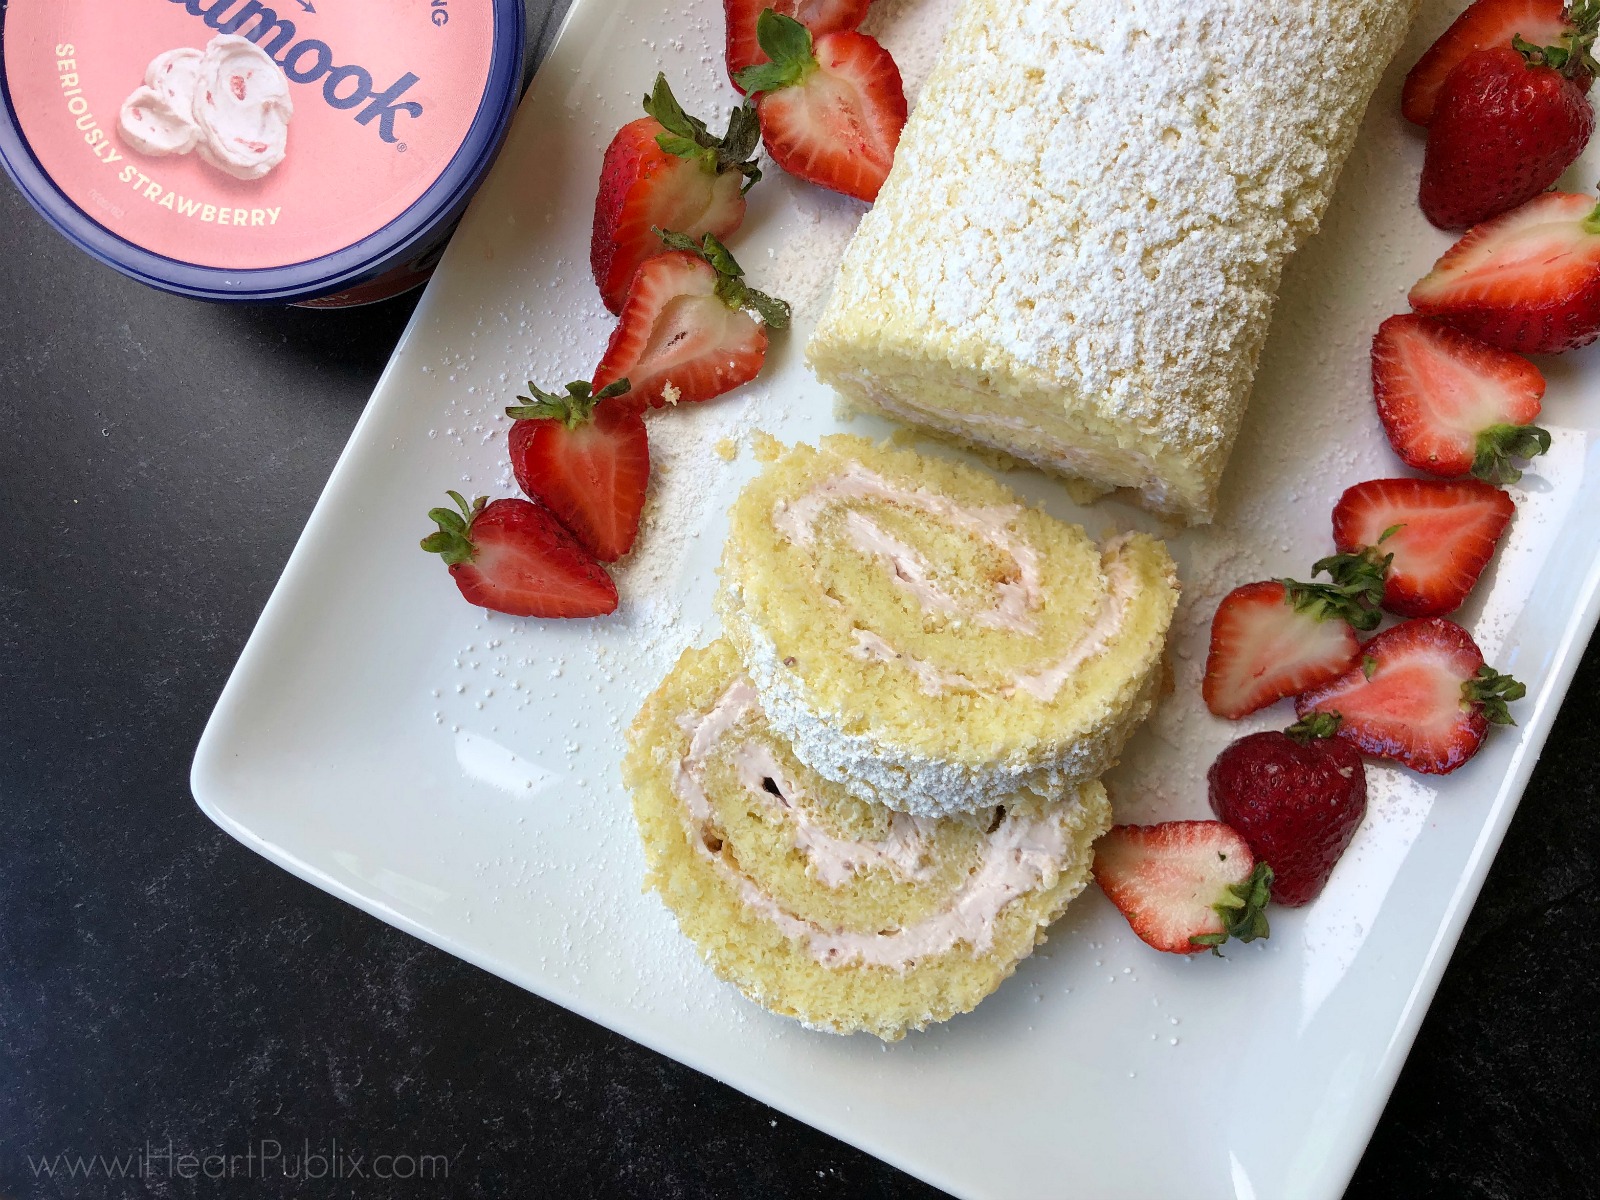 Seriously Strawberry Cheesecake Cake Roll - Tasty Dessert Made With Tillamook Cream Cheese (Save Now At Publix) on I Heart Publix 1